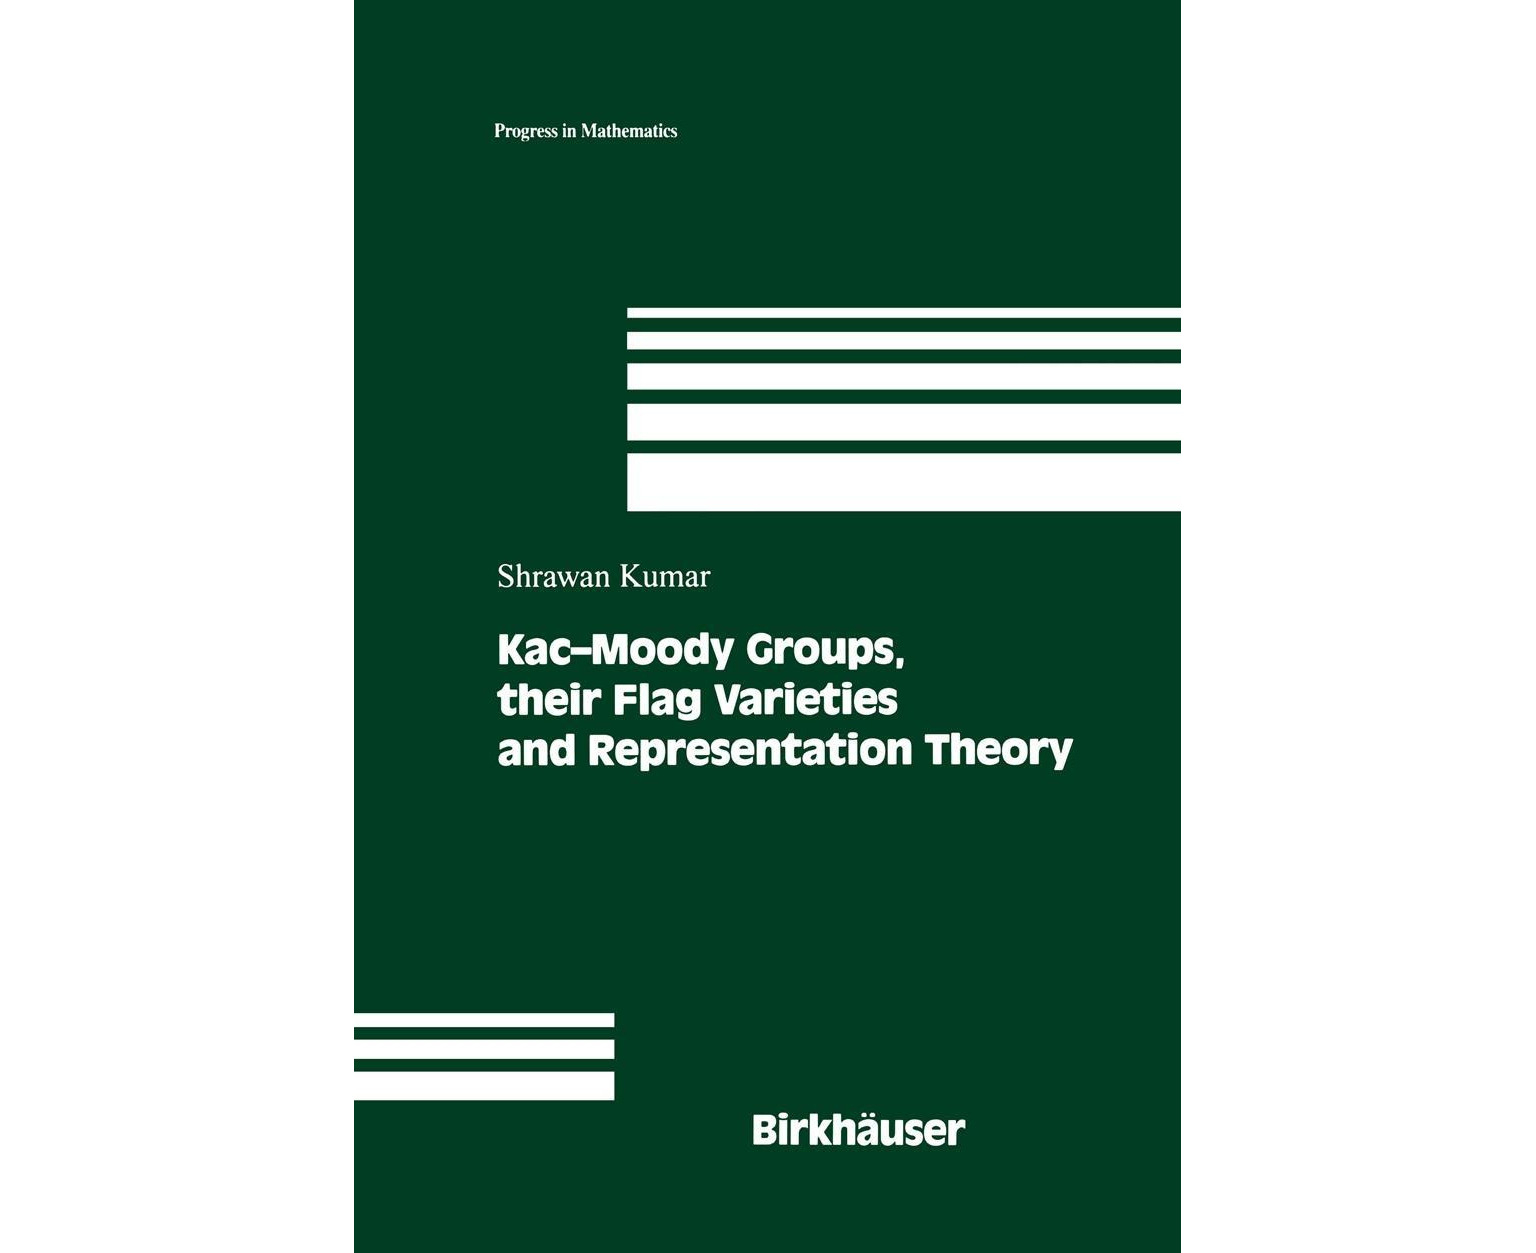 Varieties　Theory　Flag　Their　and　Kac-Moody　Representation　in　Groups,　(Progress　Mathematics)